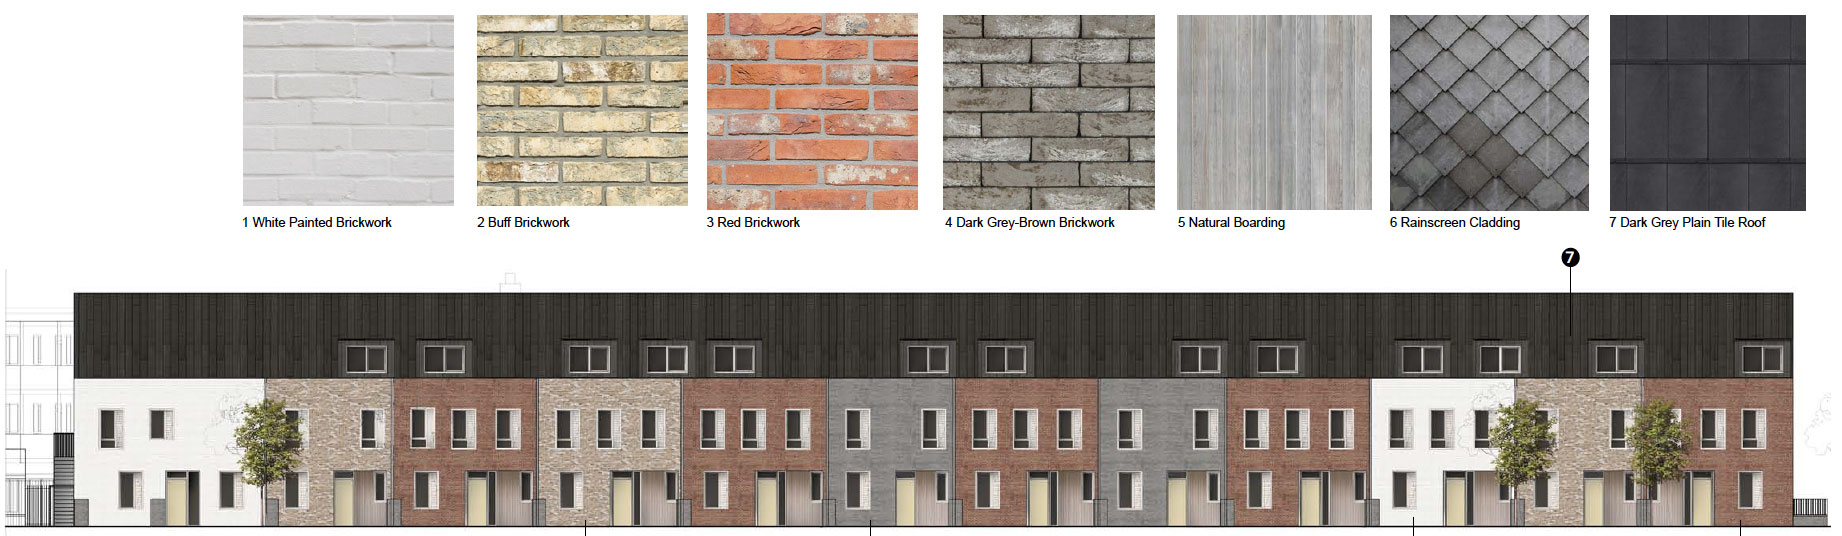 Extract from the Marmalade Lane / K1 Design and Access Statement showing a number of brick shades - grey, buff, red and painted white - and other external materials and how these look on a terraced street elevation